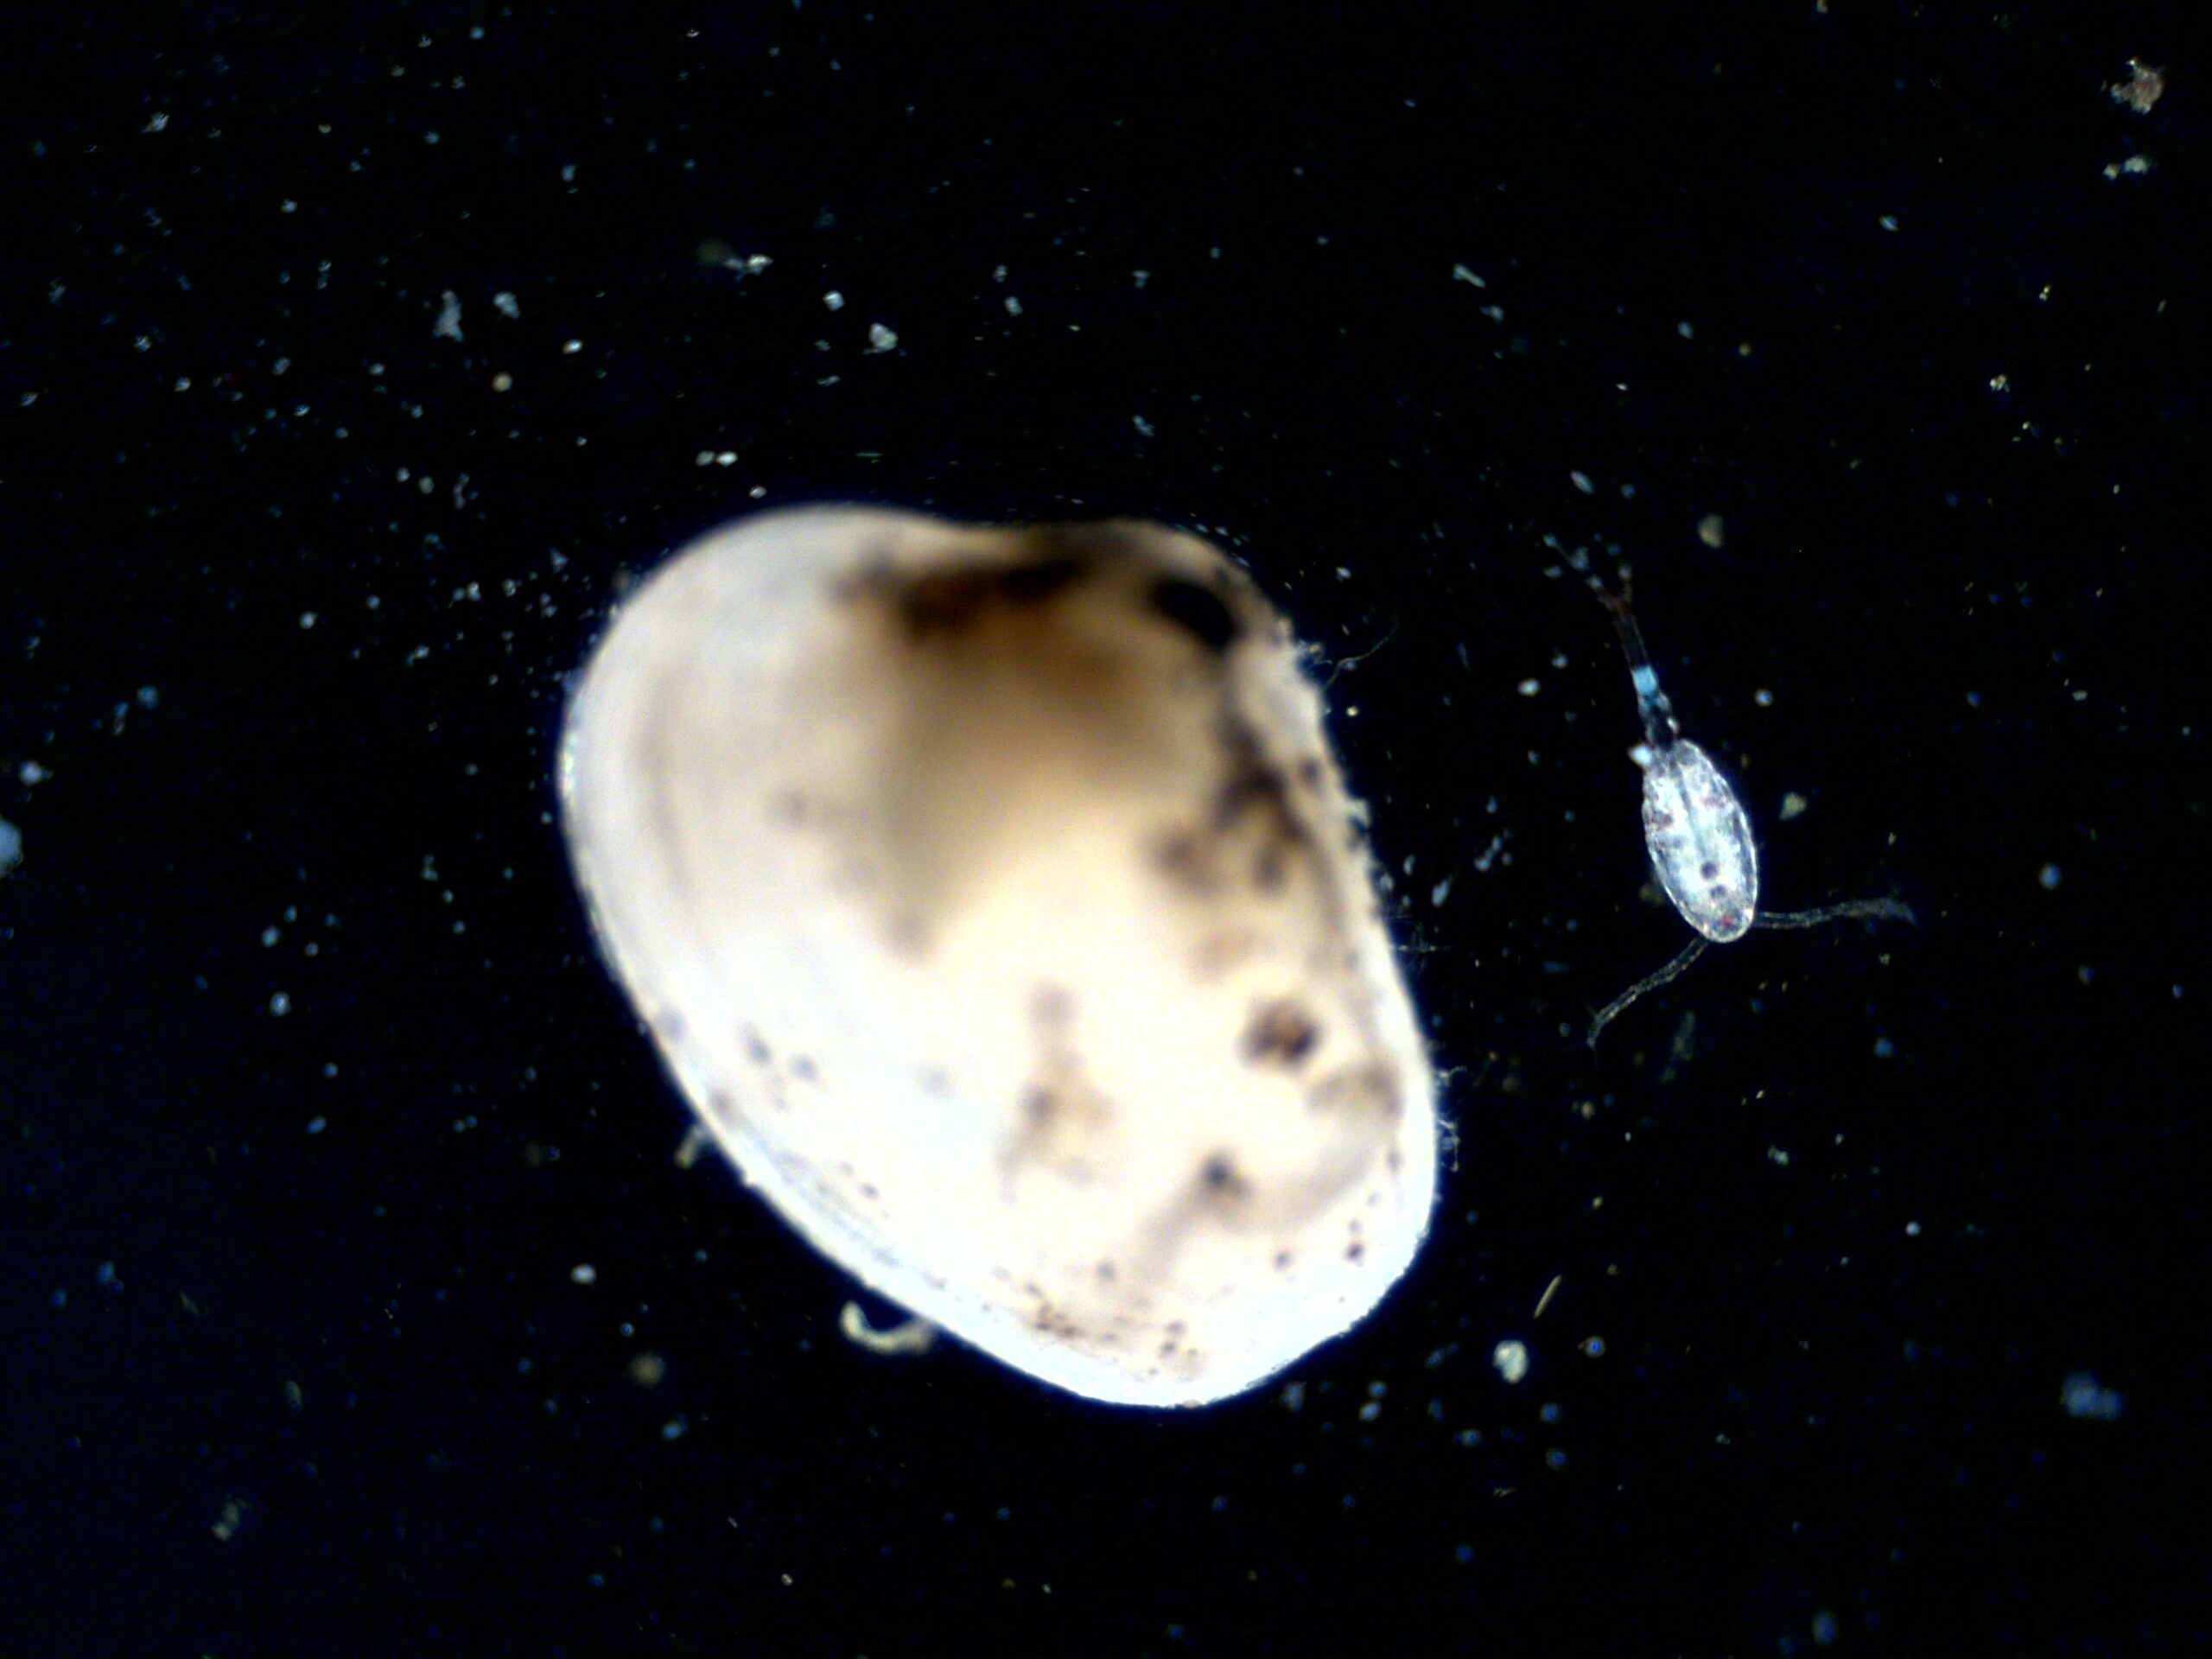 Post veliger clam with copepod